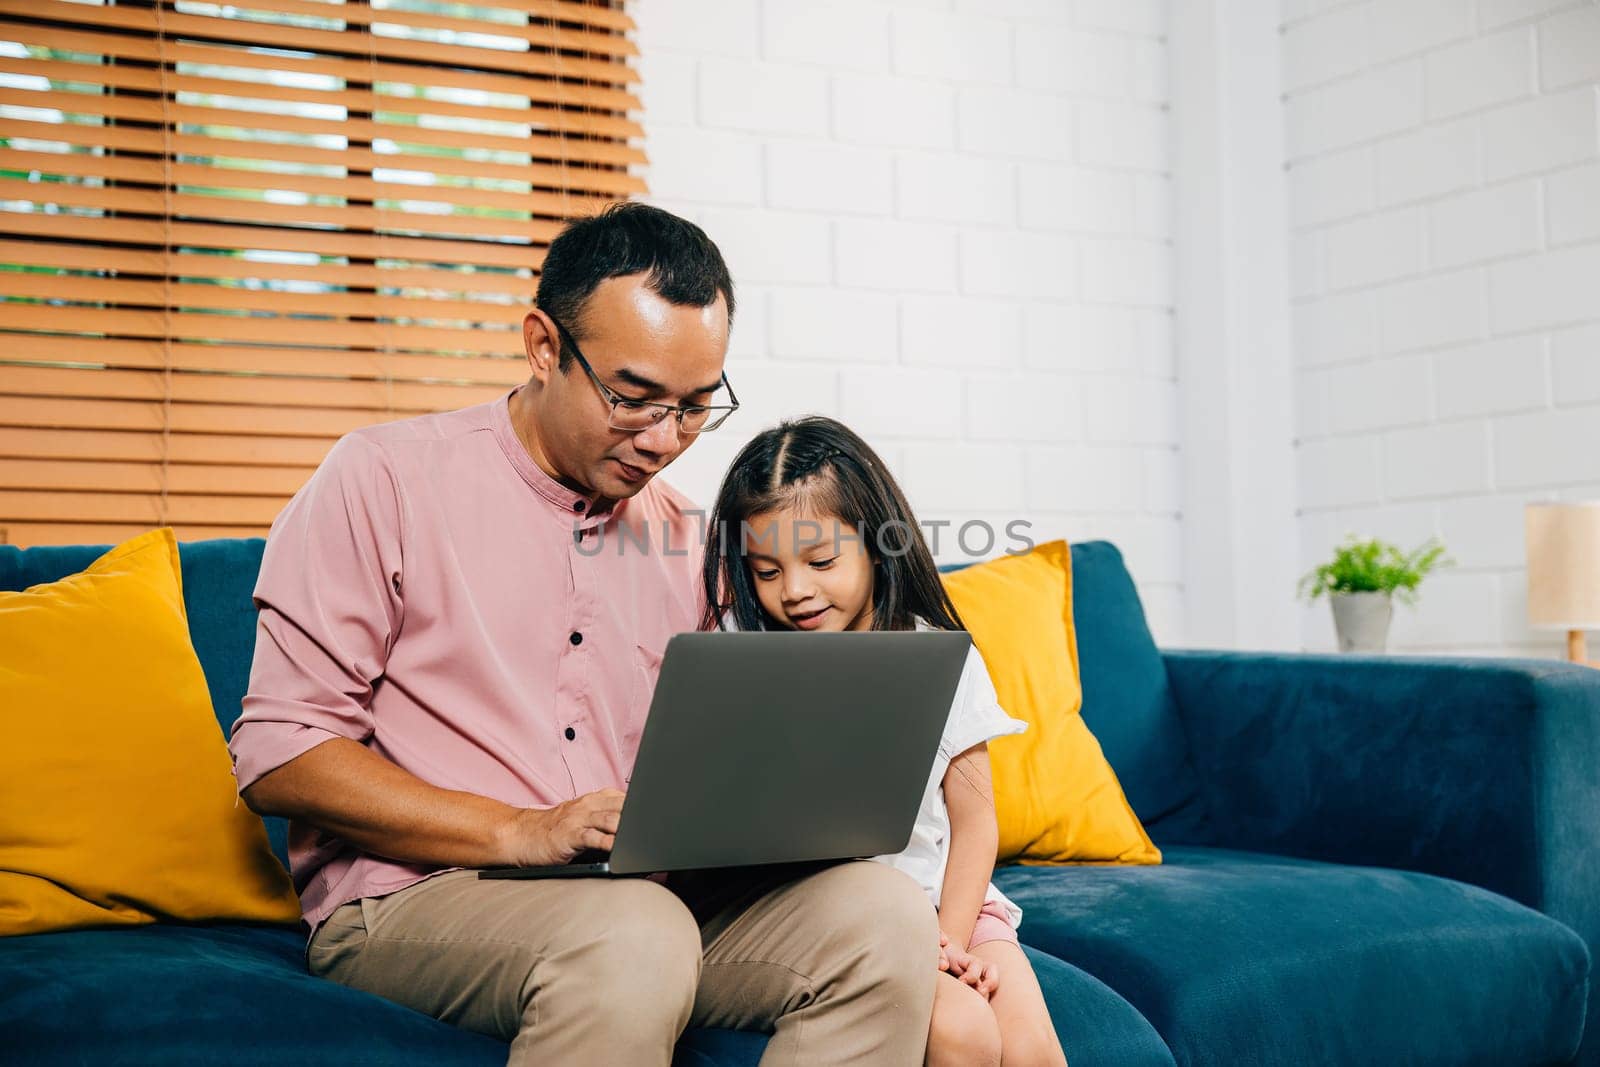 Smiling Asian father balances work and family with his daughter on laptop for e-learning creating special bonding moment on sofa. In their modern living room happiness and togetherness fill the air.